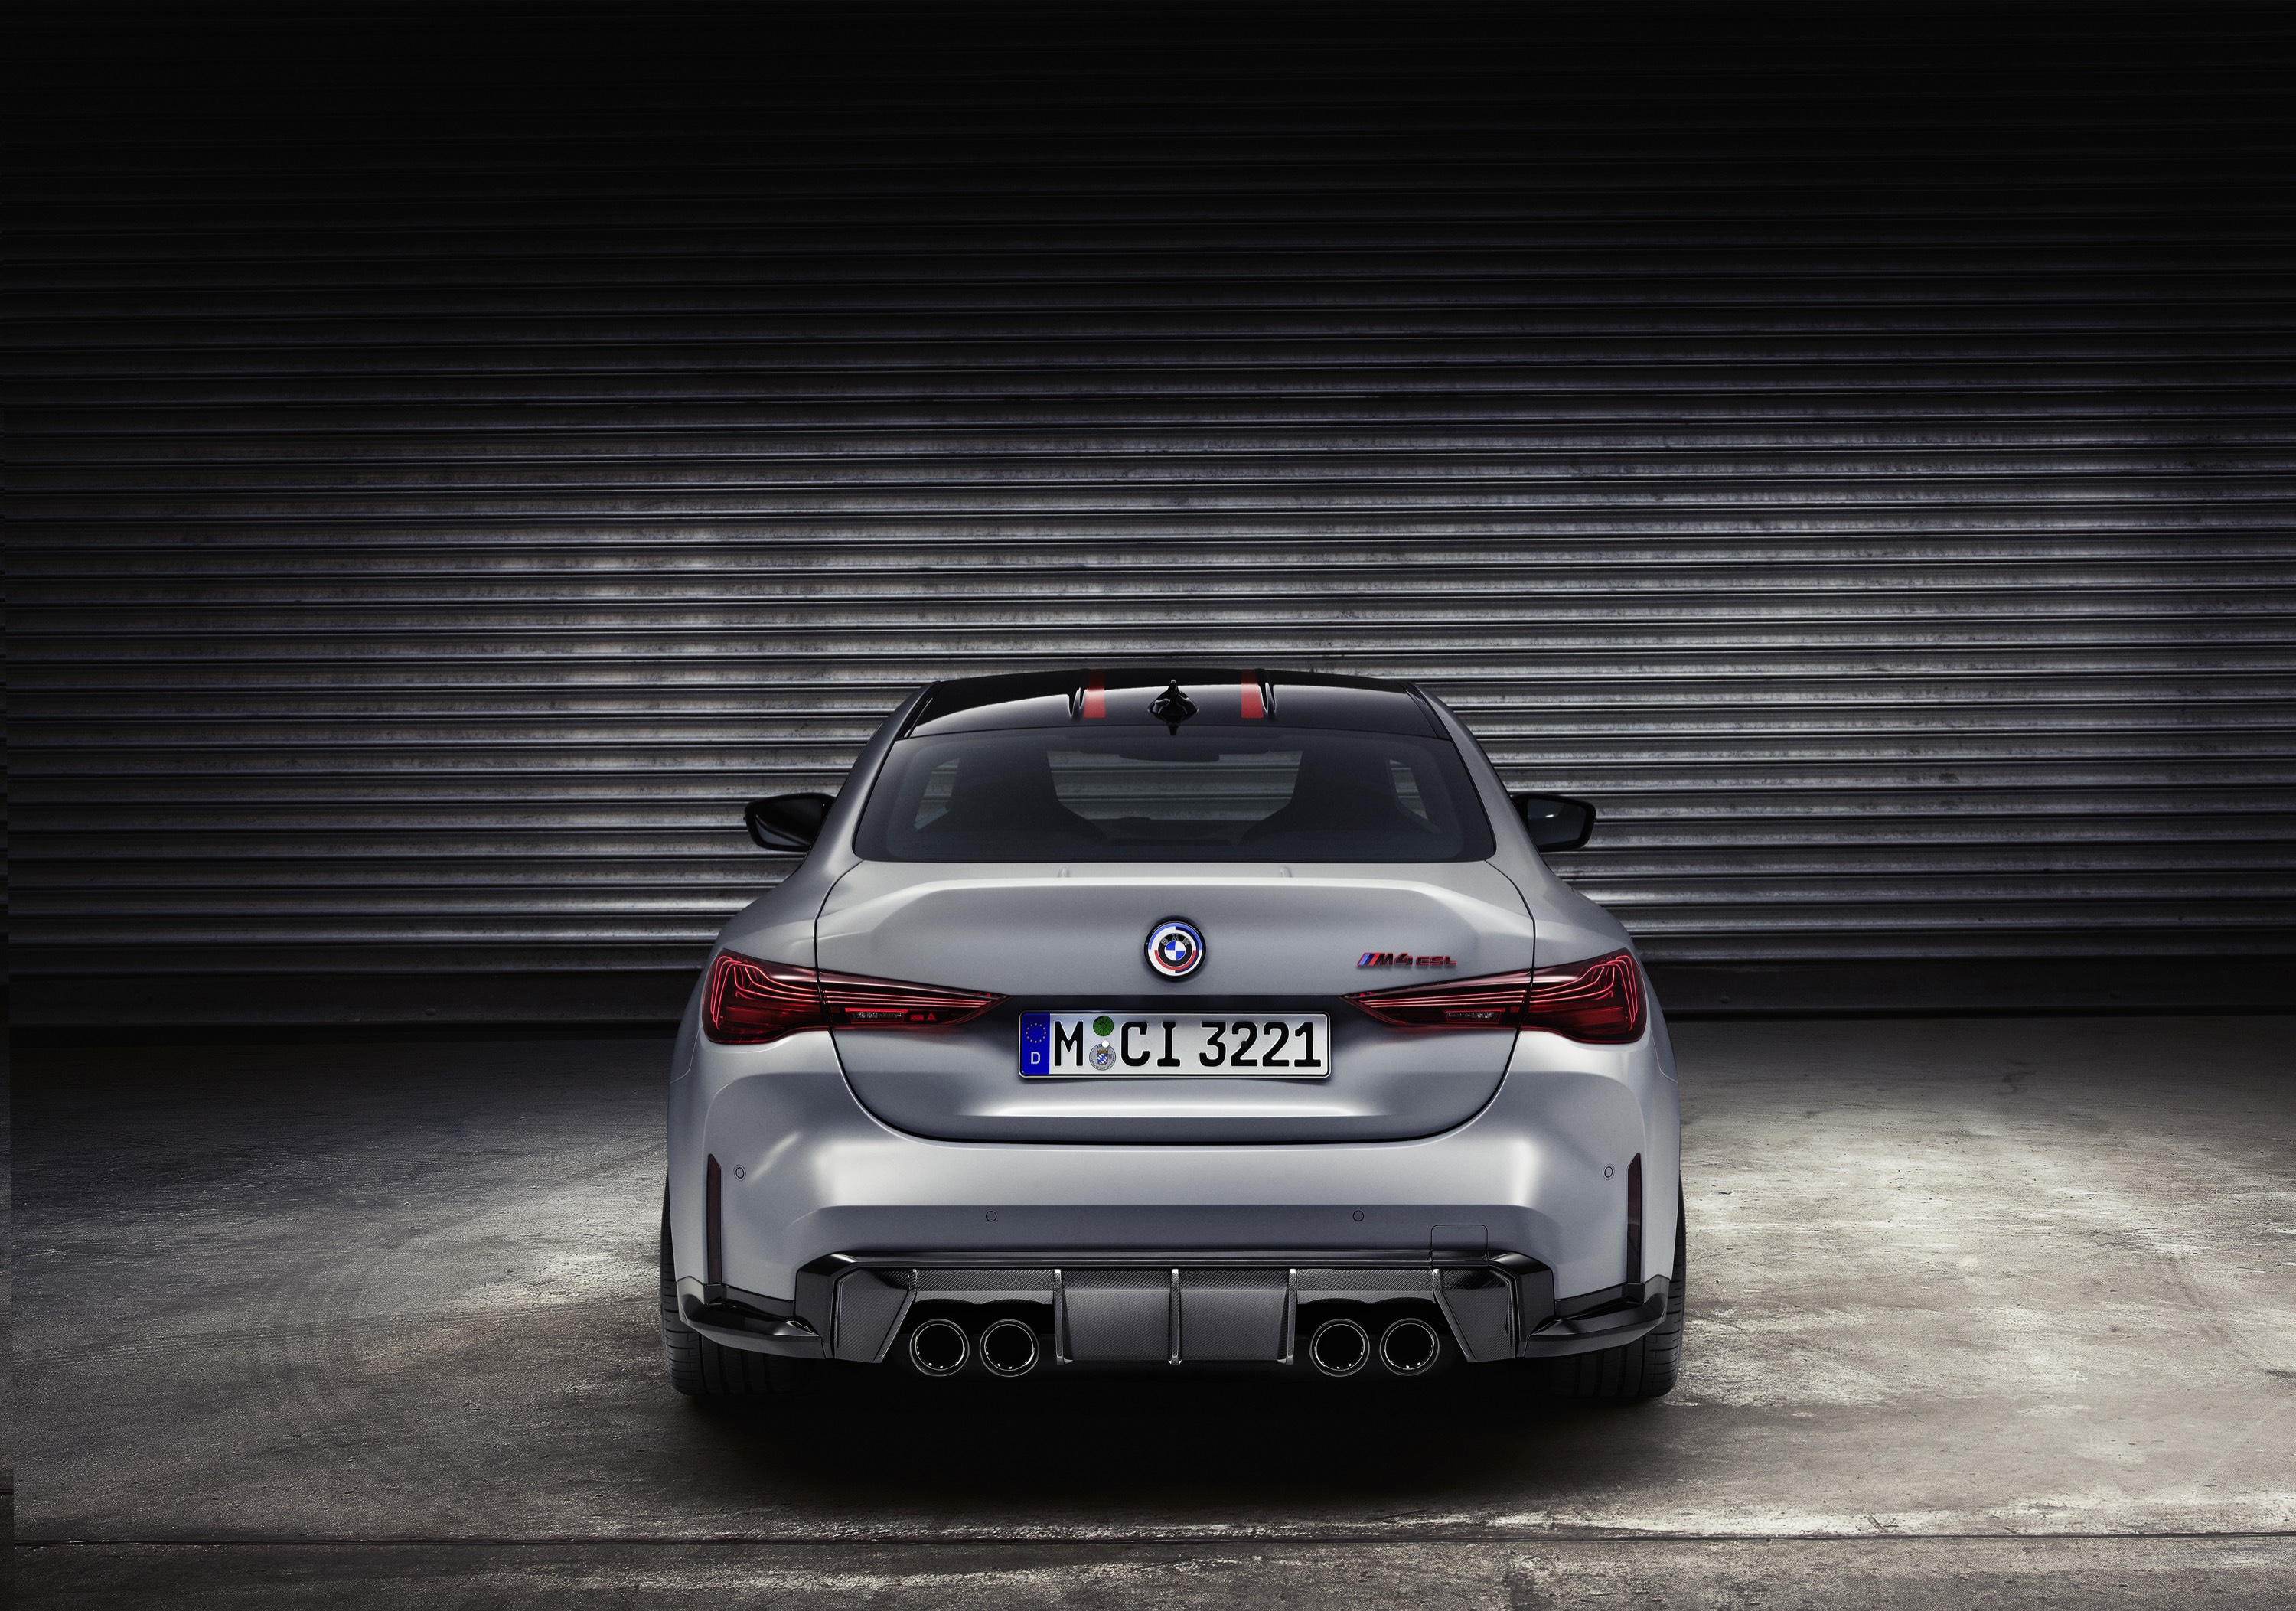 The all-new BMW M4 CSL - The Re-Edition of a Legend.